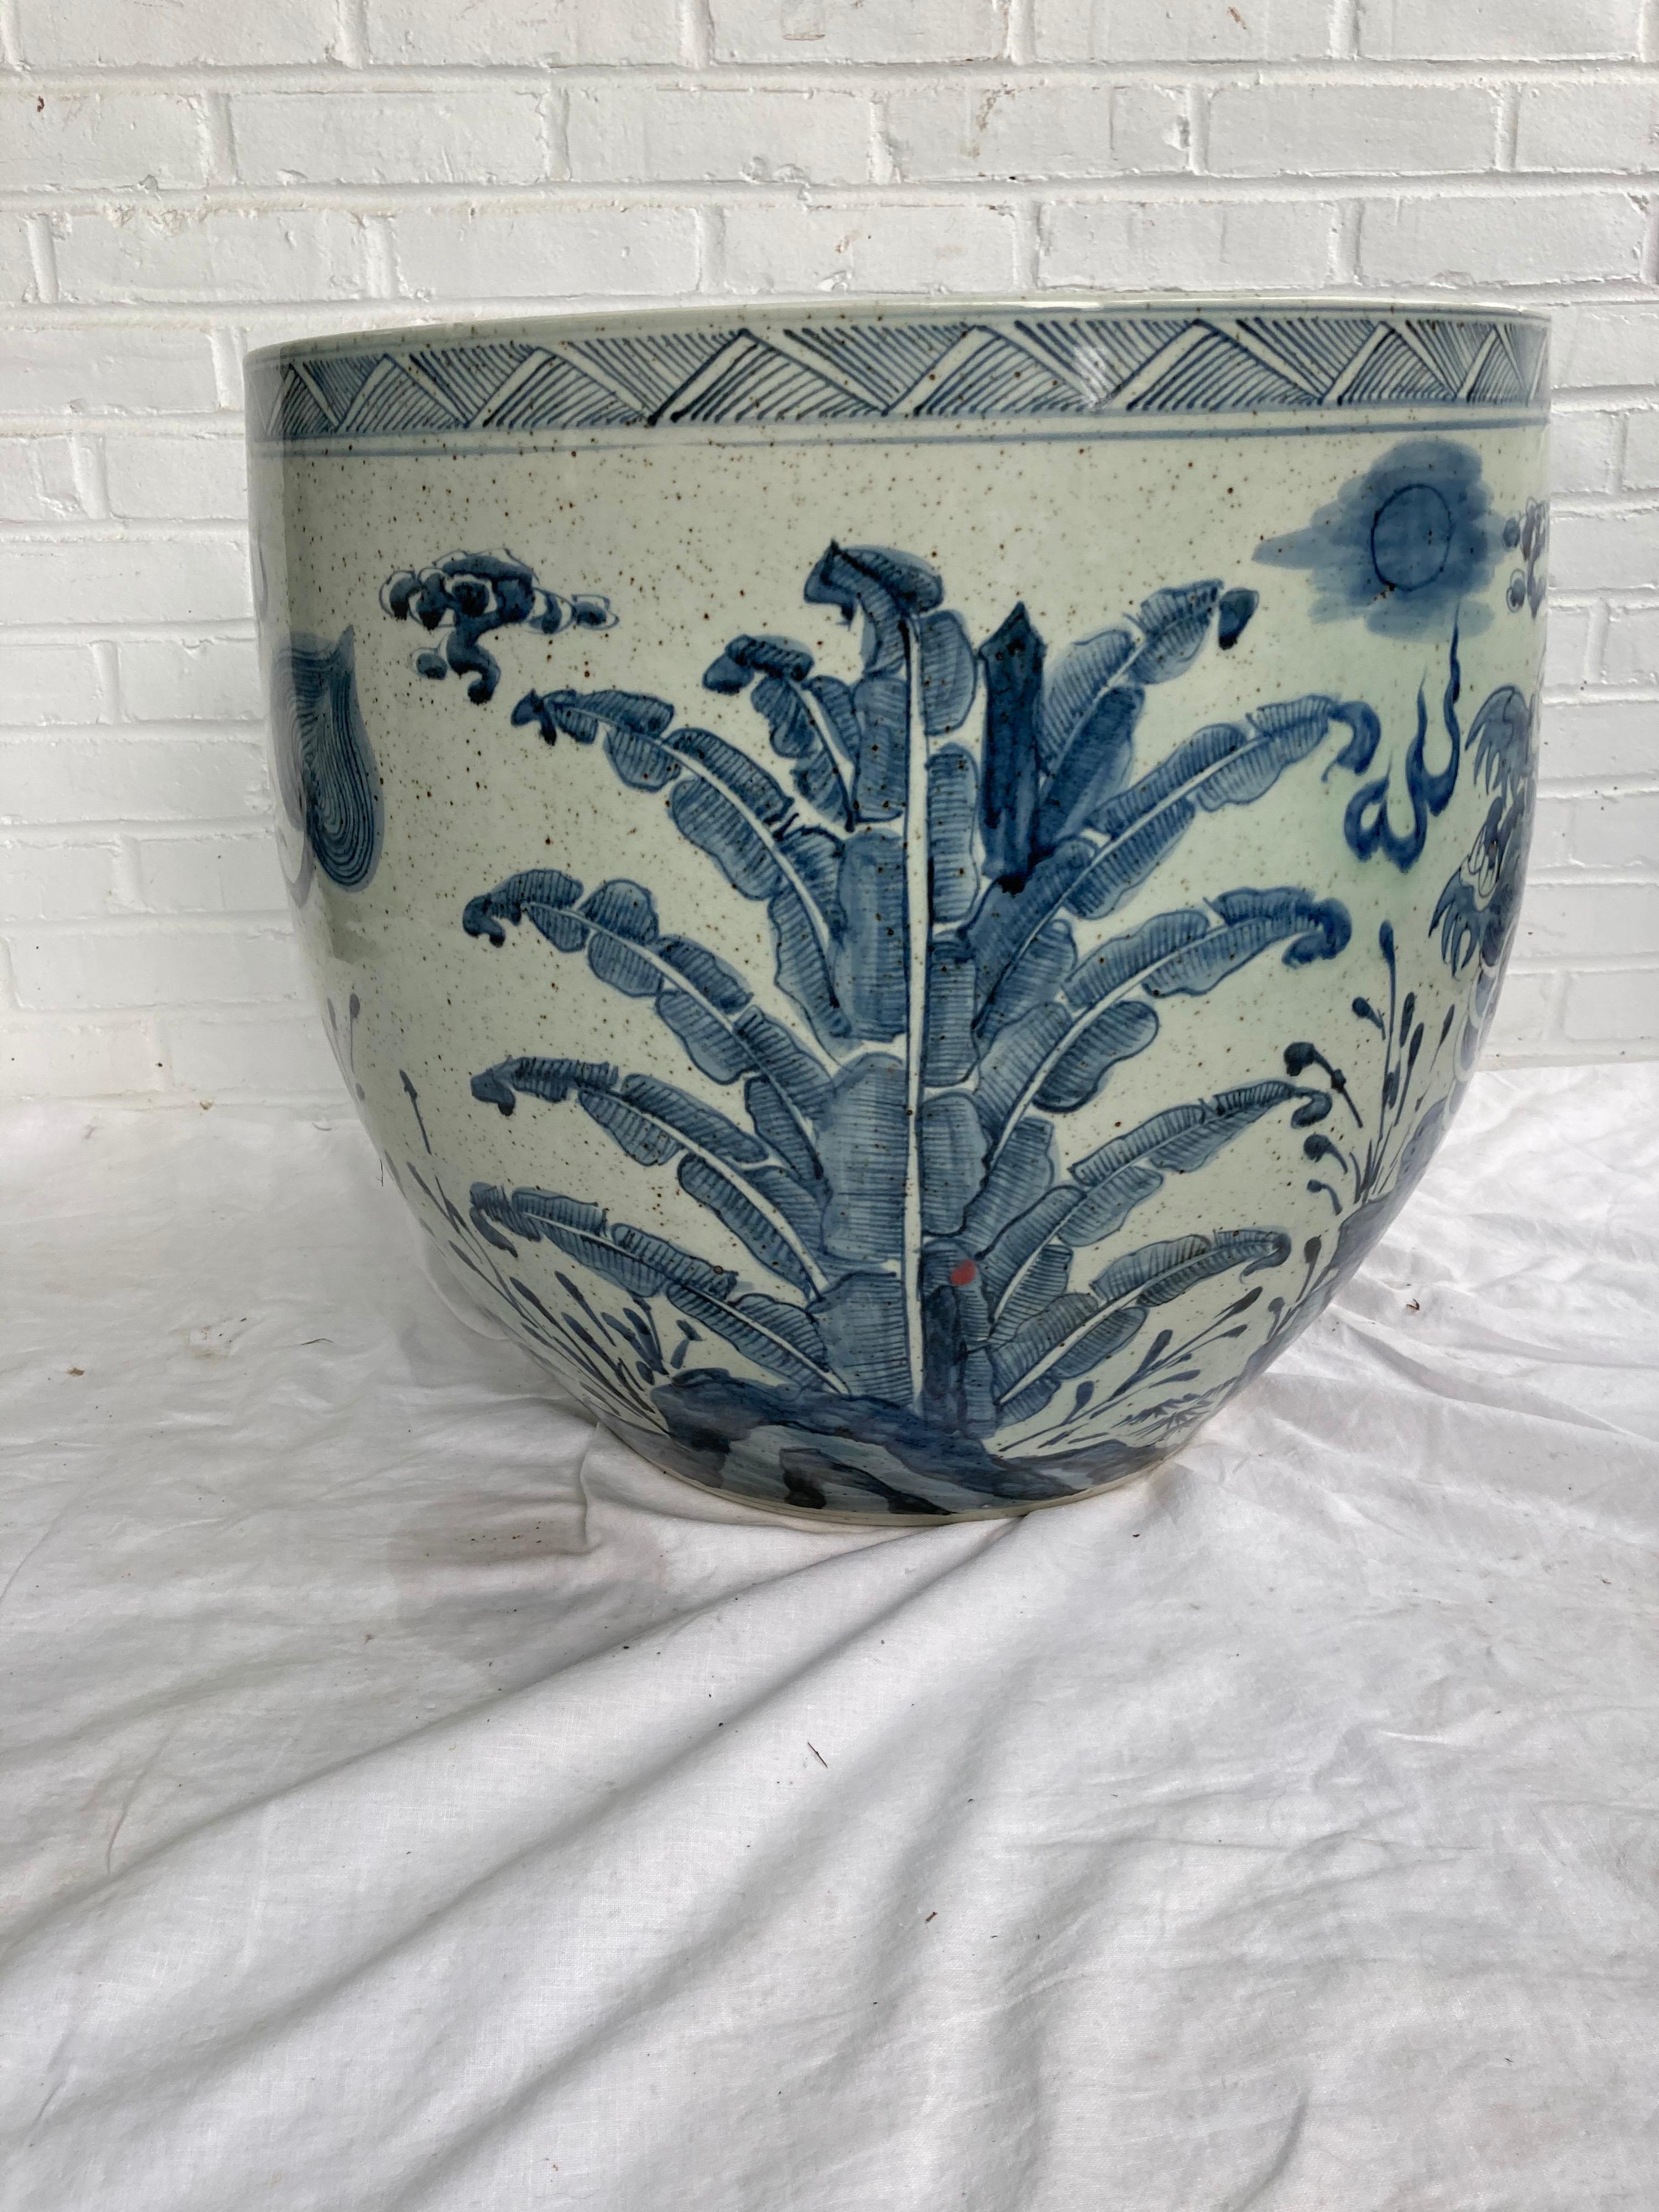 A very large single Chinese blue and white fish bowl/planter depicting a dragon and palms ... very heavy.